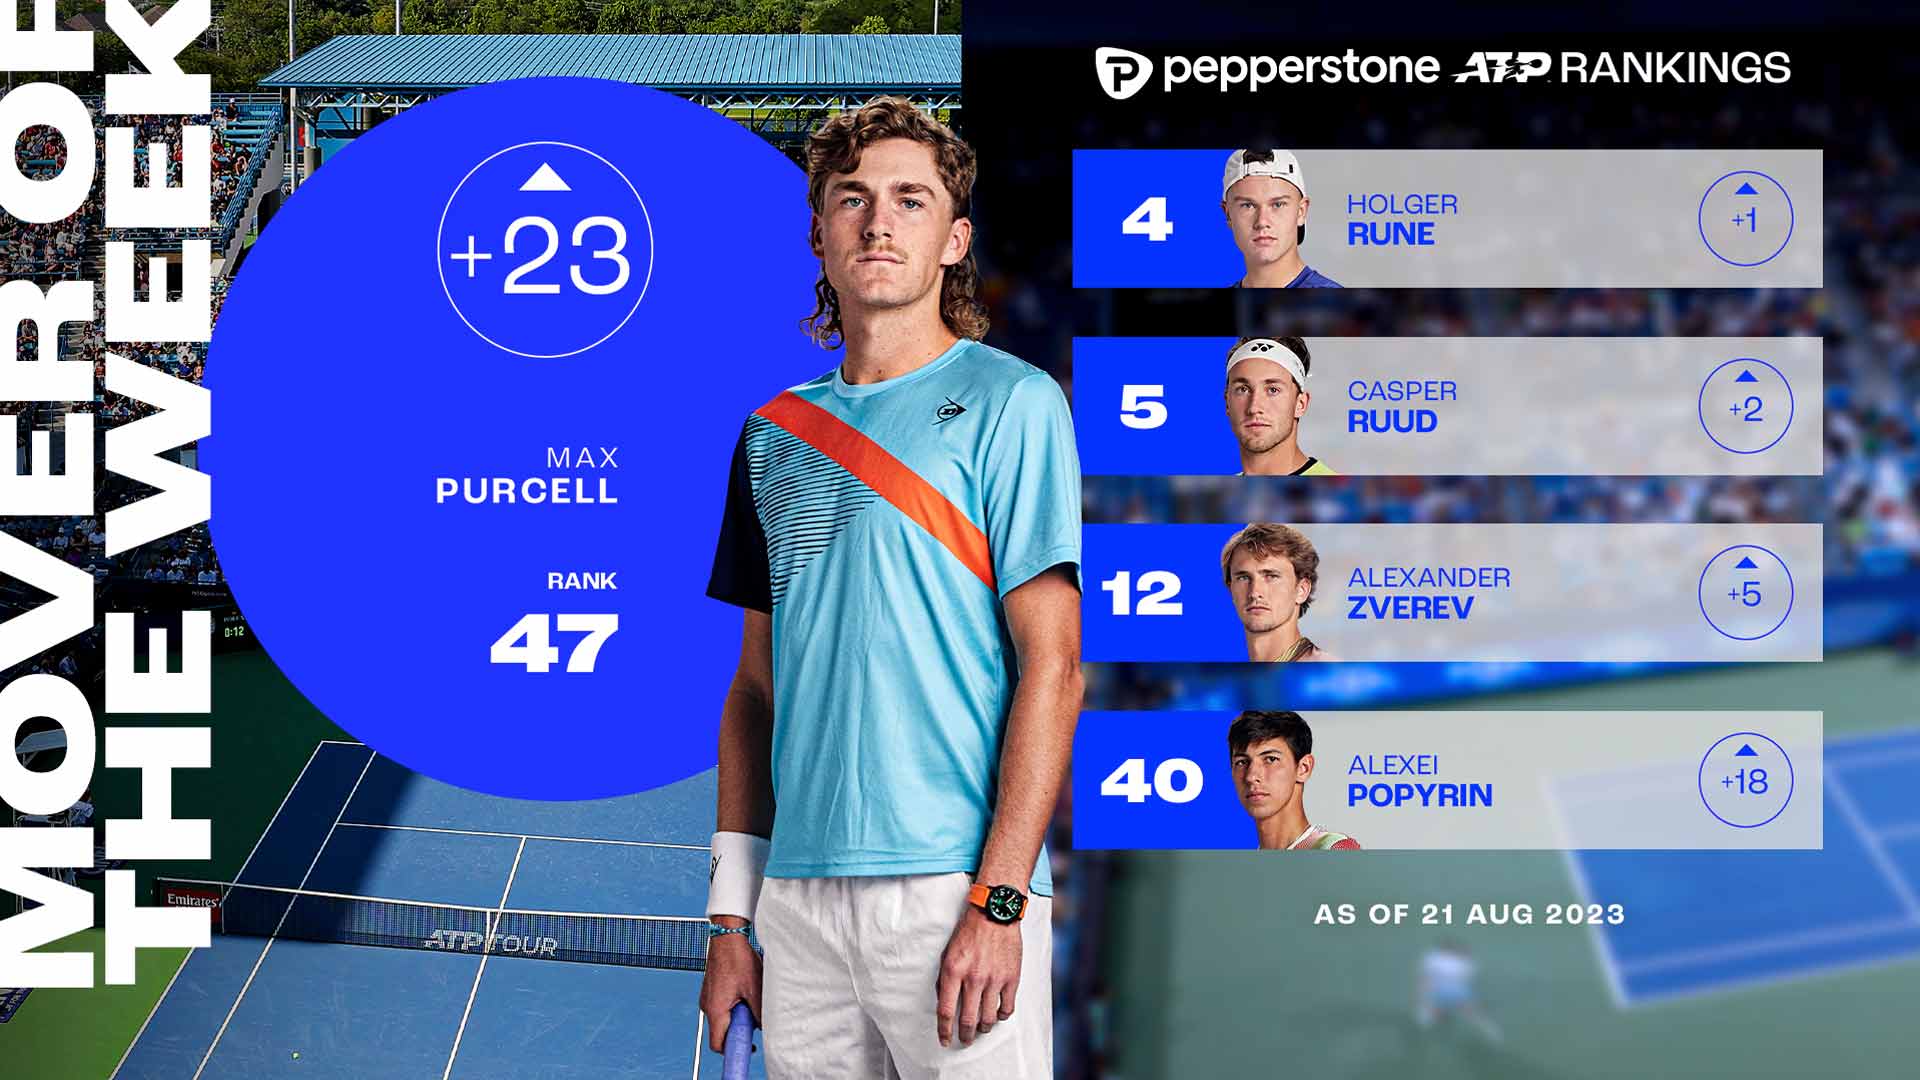 Max Purcell reached the quarter-finals in Cincinnati on just his second ATP Masters 1000 main-draw appearance.